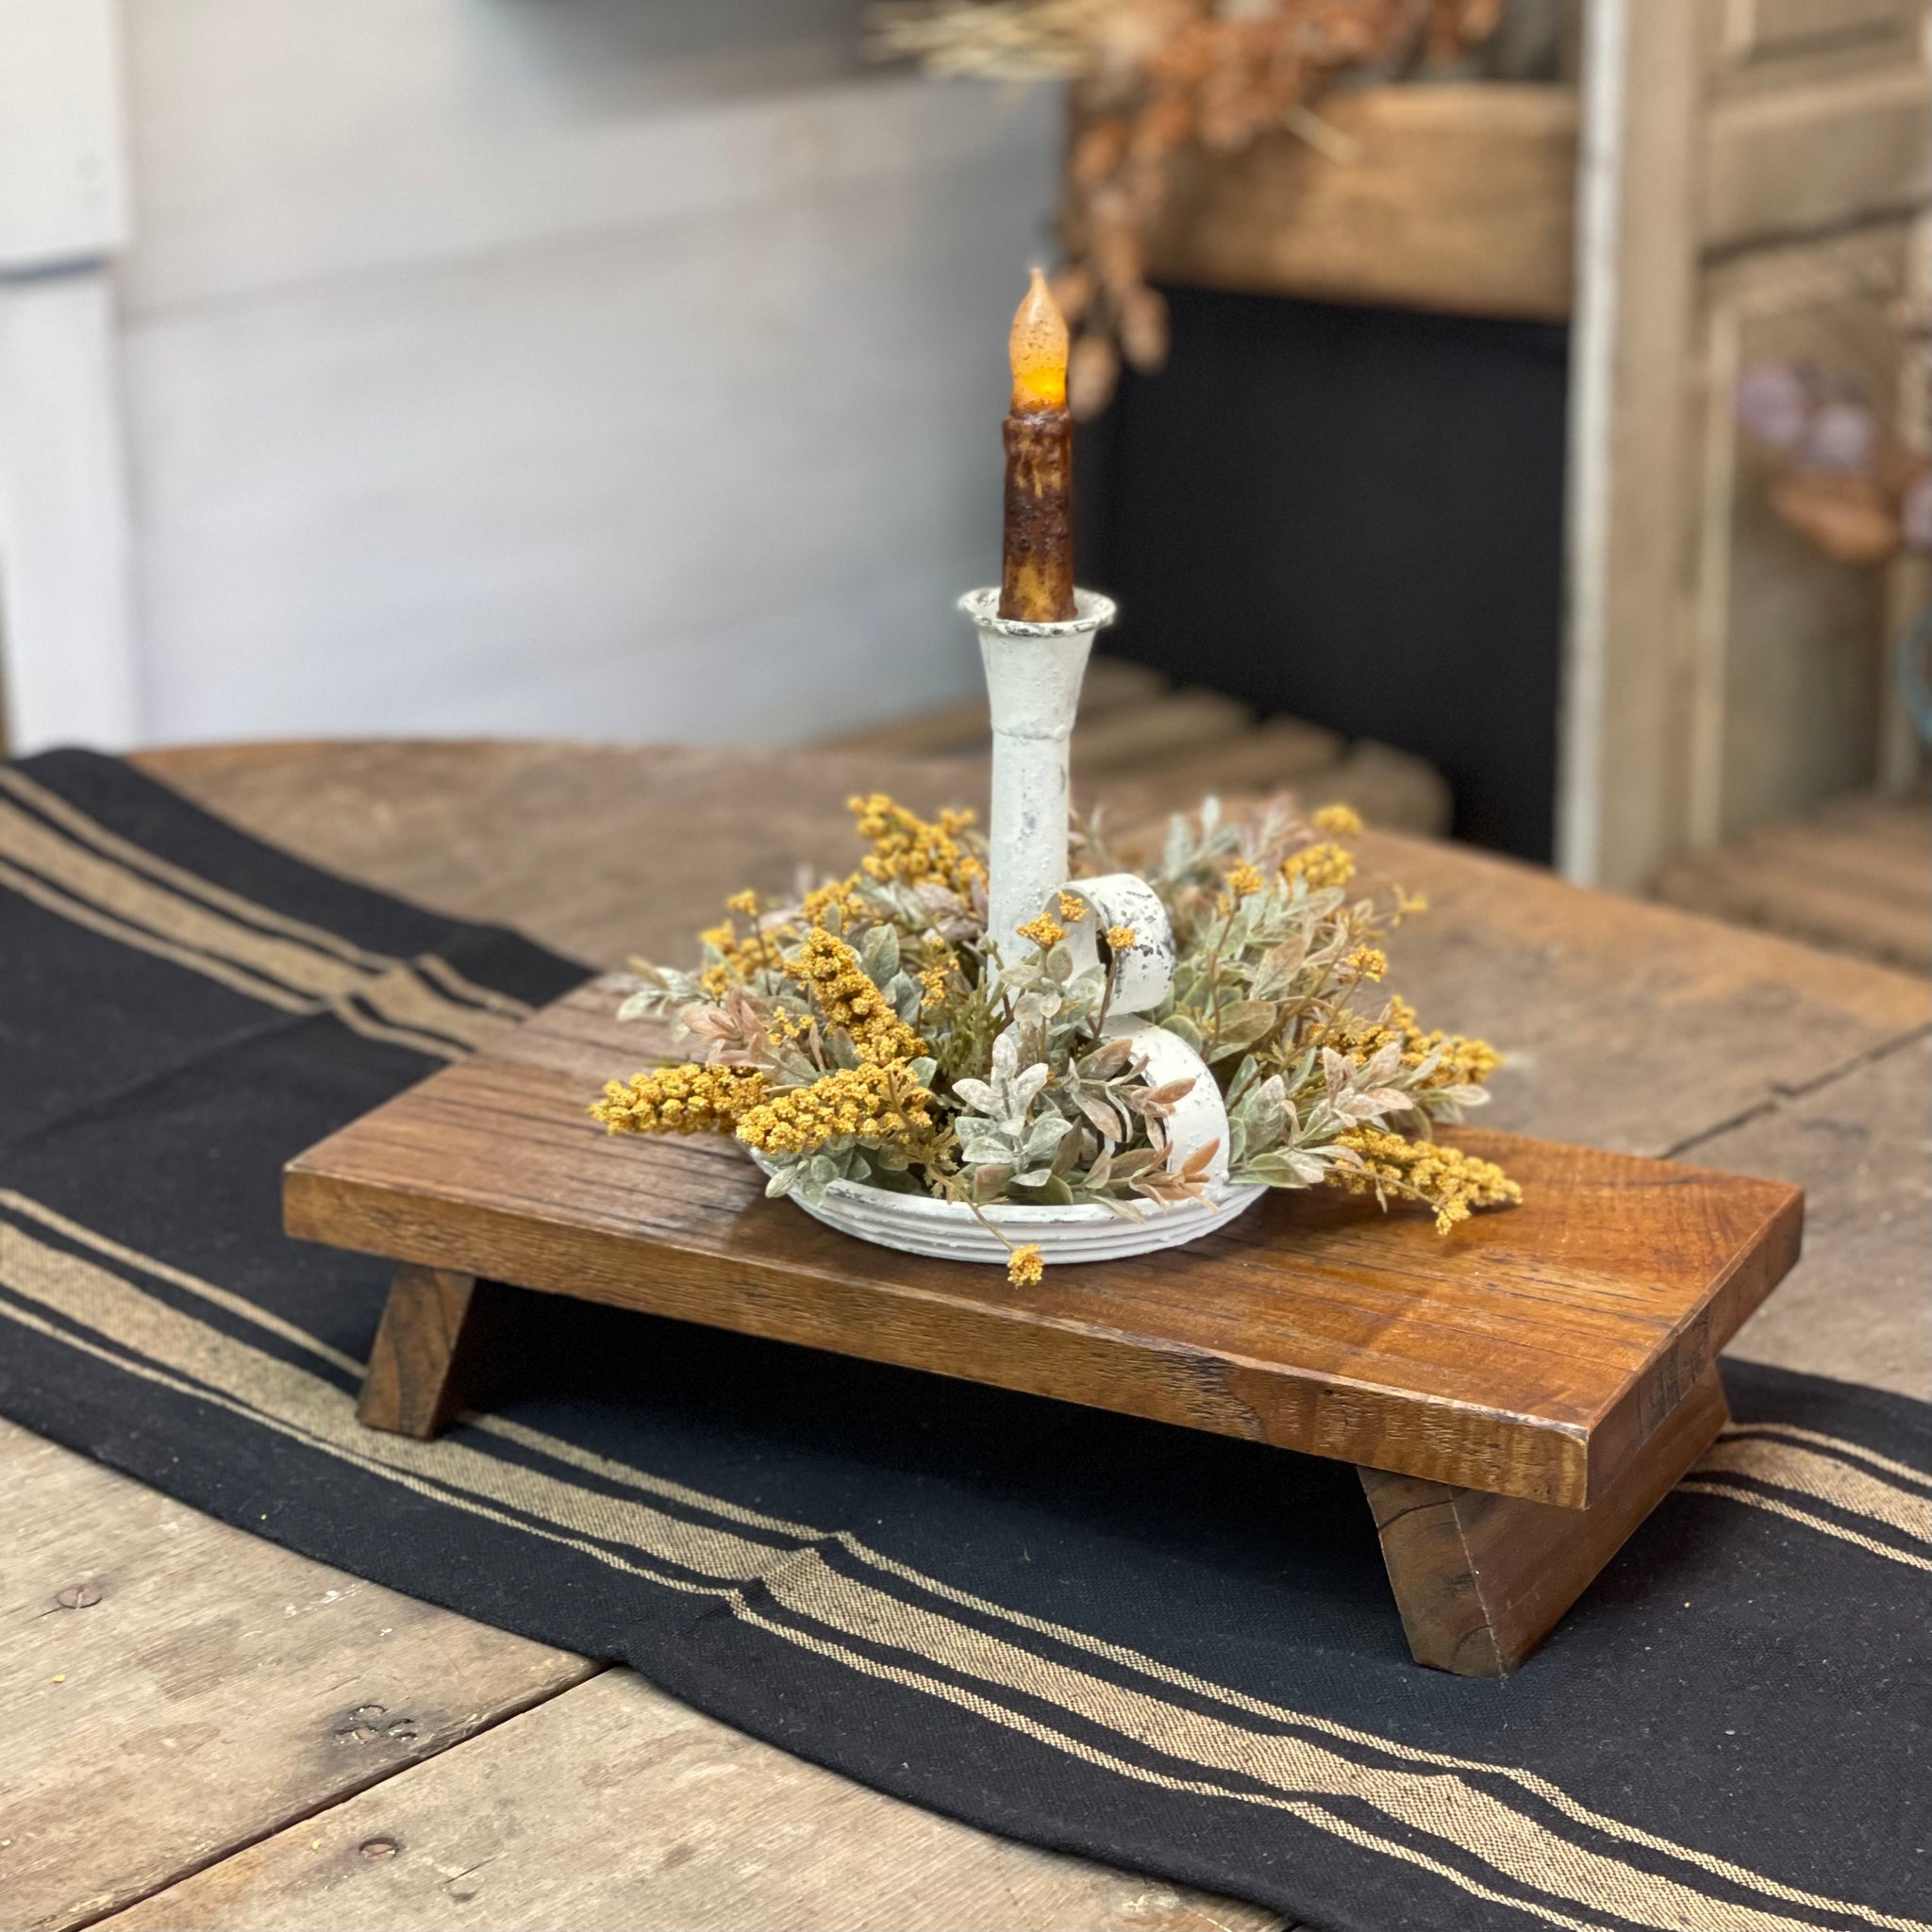 Rustic Brown Table Riser - FREE Candle Ring Included - Limited Time!